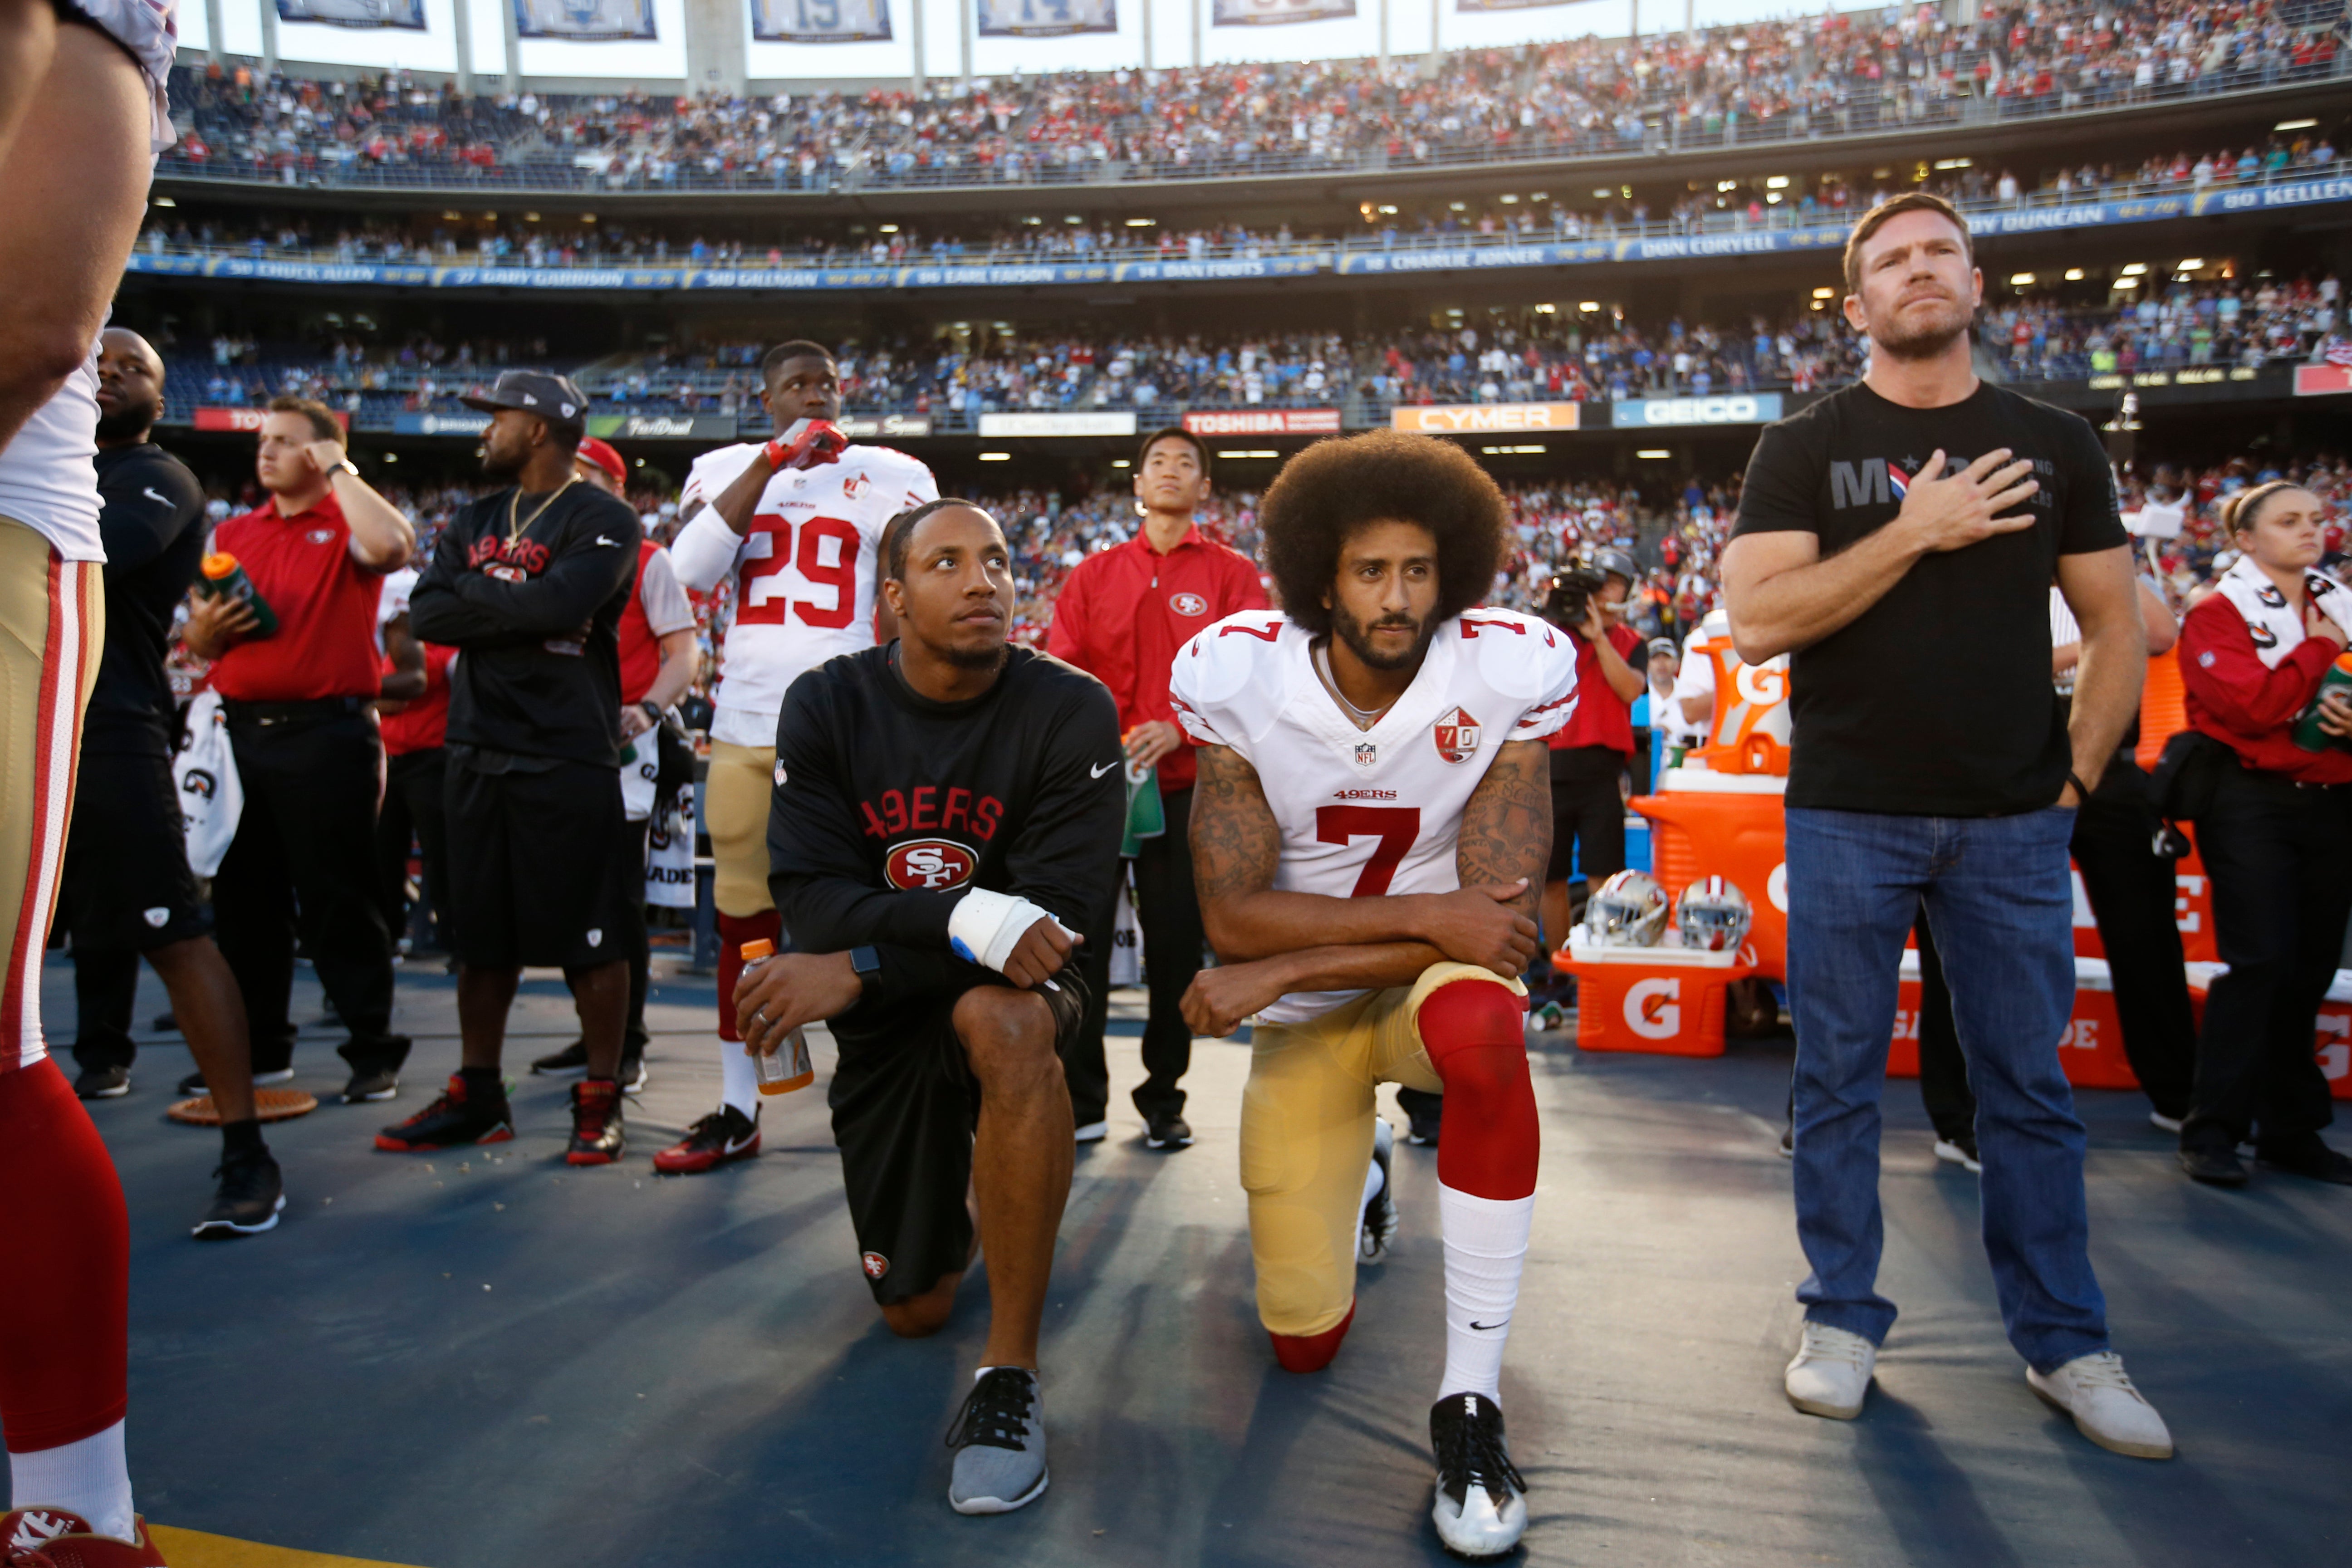 Protest Players: Here Are All The Athletes Who Took A Knee On NFL Kickoff Sunday
